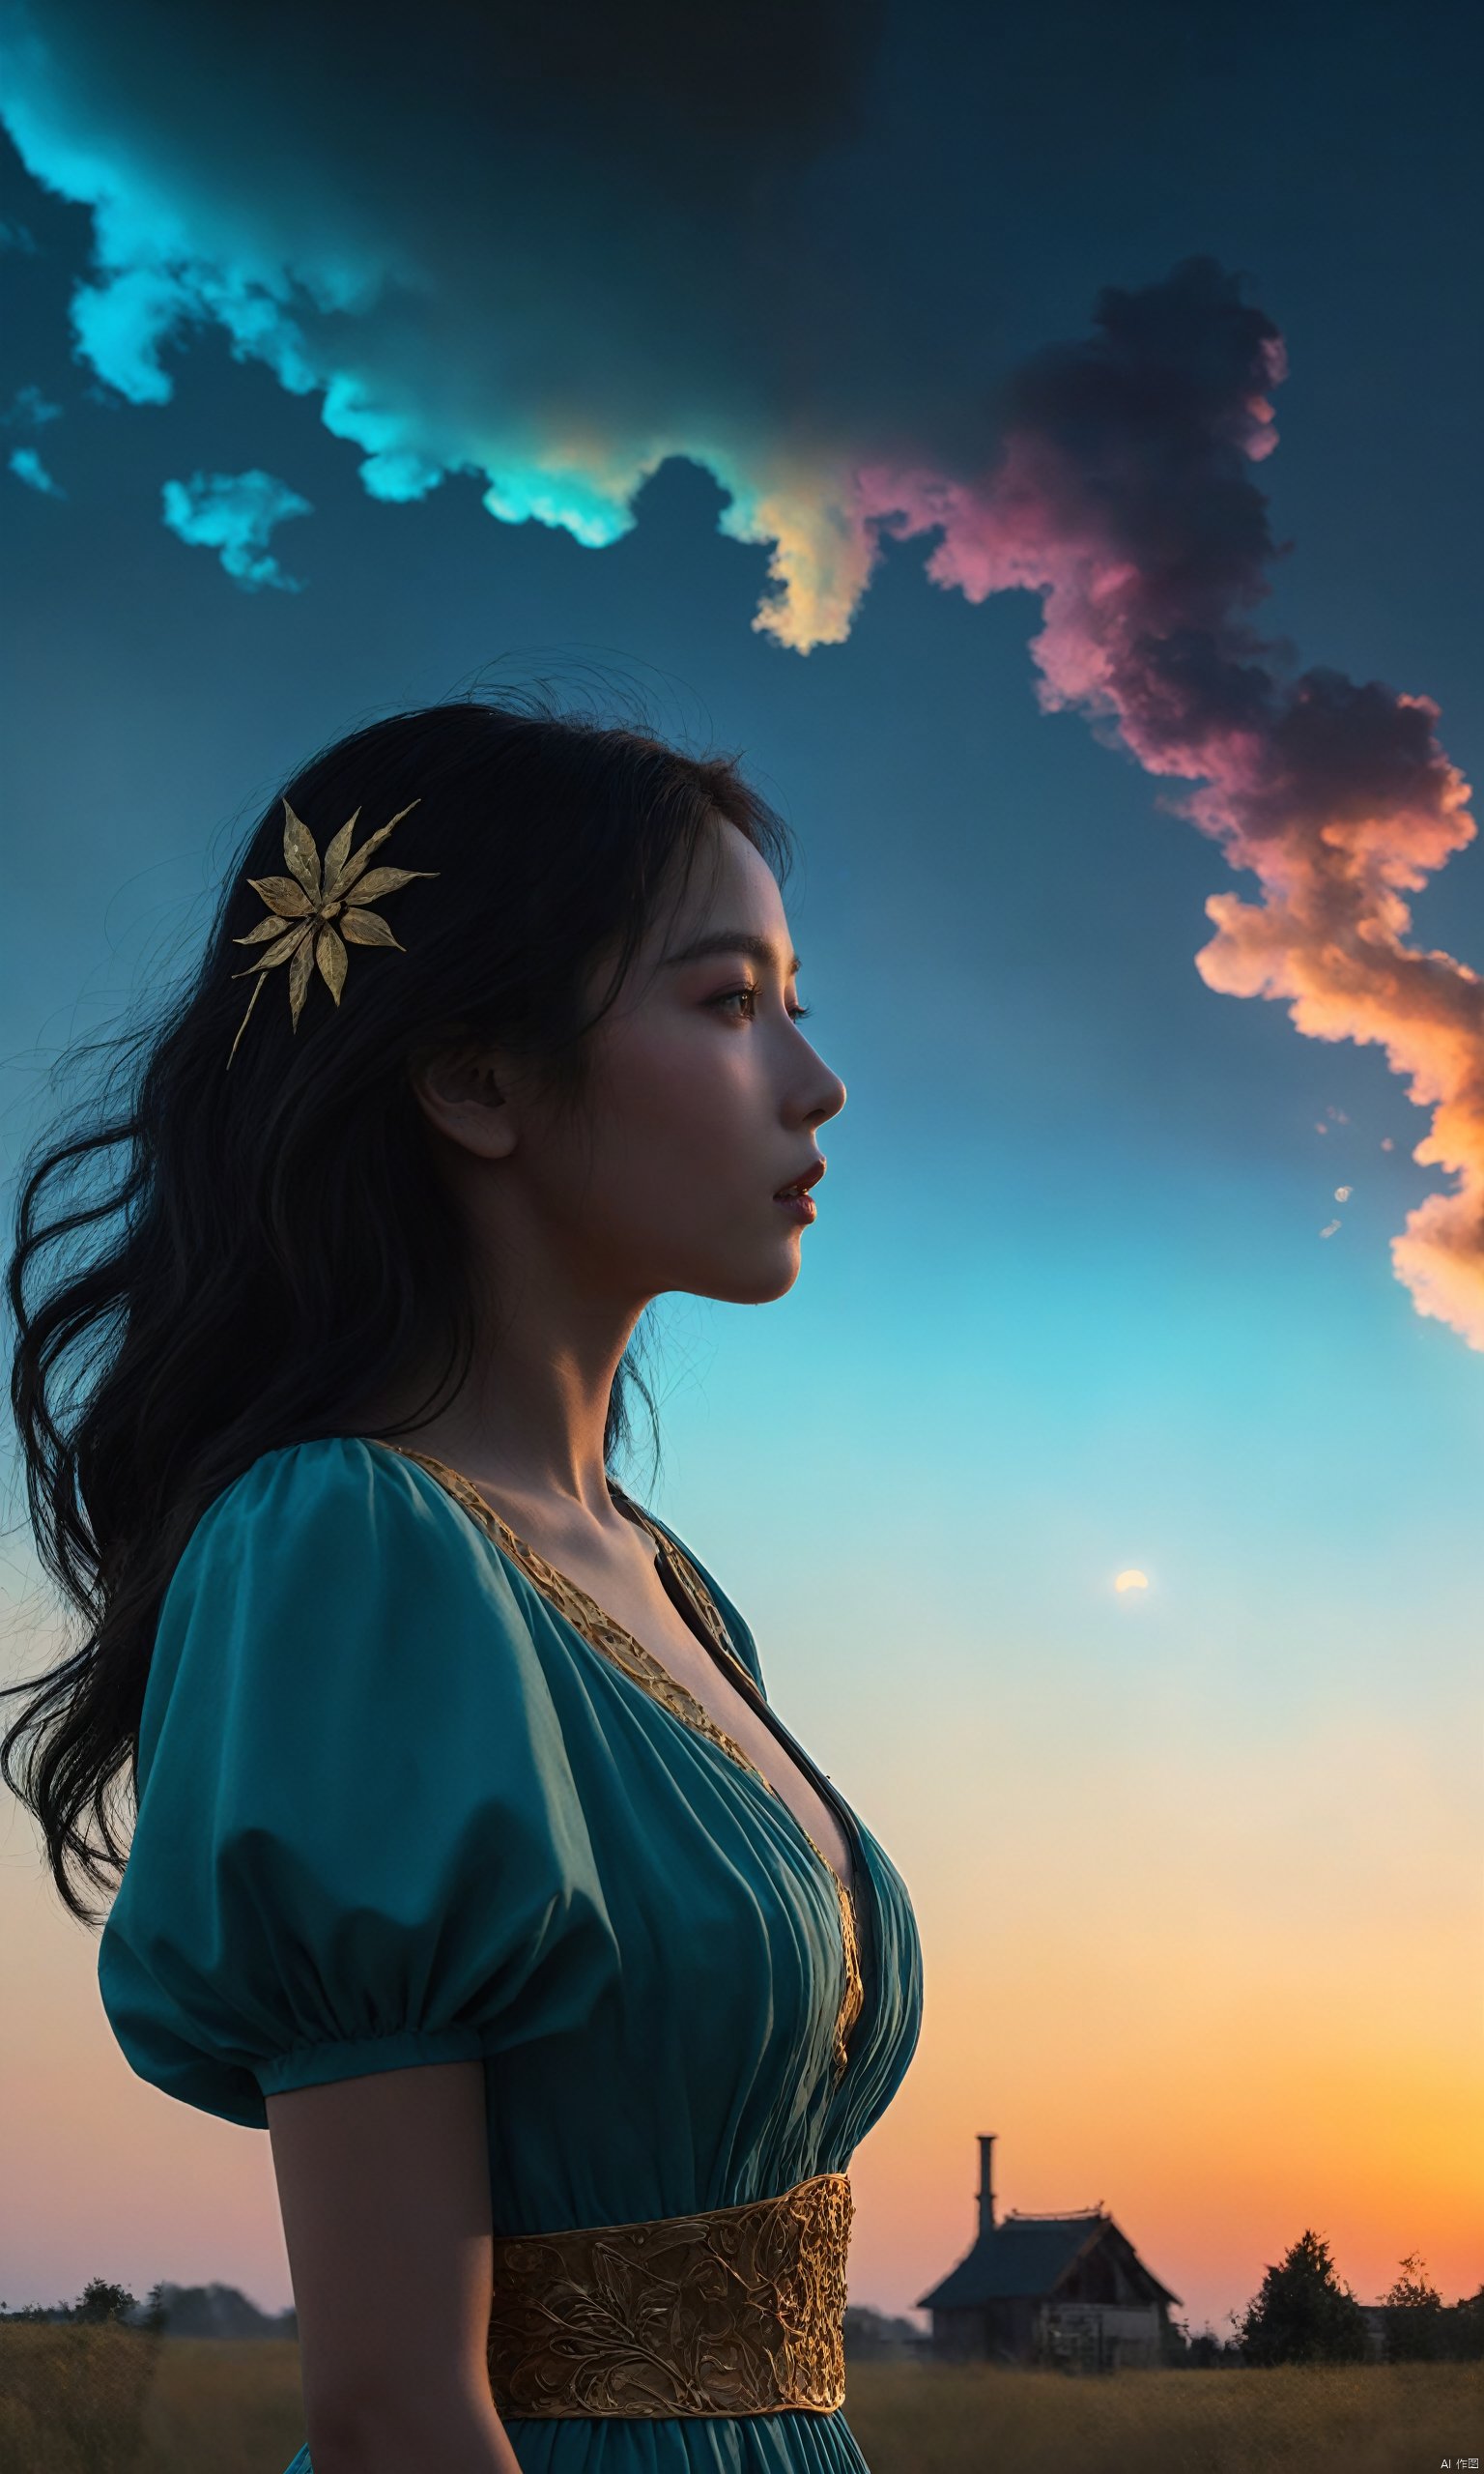  1girl, (from side), (silhouette:1.2), profile, big hair, masterpiece, best quality, light particle, depth of field, field, scenery, fantasy, indigo light, (far away:1.1), cute girl, midriff, tribal sash, pastel colors, chromatic aberration, glow in the dark dark, cloudy sky, space, orange aura, aura, cinematic, dark atmosphere, night , dark hole, glowing eyes, teal light, illumination, light rays, eye in the sky, (grass:0.9), falling petals, oniric portrait of a tall cloaked figure with a white mask, Azem the Traveler, yearning to explore the ends of the world to discover its wonders and help its denizens, by Andy Kehoe, a gradient masterpiece, blue cyan yellow, Rococopunk, luminism, seamless, China ink, Ink Bubbles, Gold leaf lines, alcohol ink elements, curved lines, cinematic, realism, chiaroscuro, Shadow play, Gold leaf small lines, bright splashes of alcohol ink puddles, volumetric light, auras, rays of sunlight, bright colors reflect, isometric, digital art, smog, pollution, toxic waste, chimneys and railroads, 3d render, octane render, volumetrics, by greg rutkowski, anime style